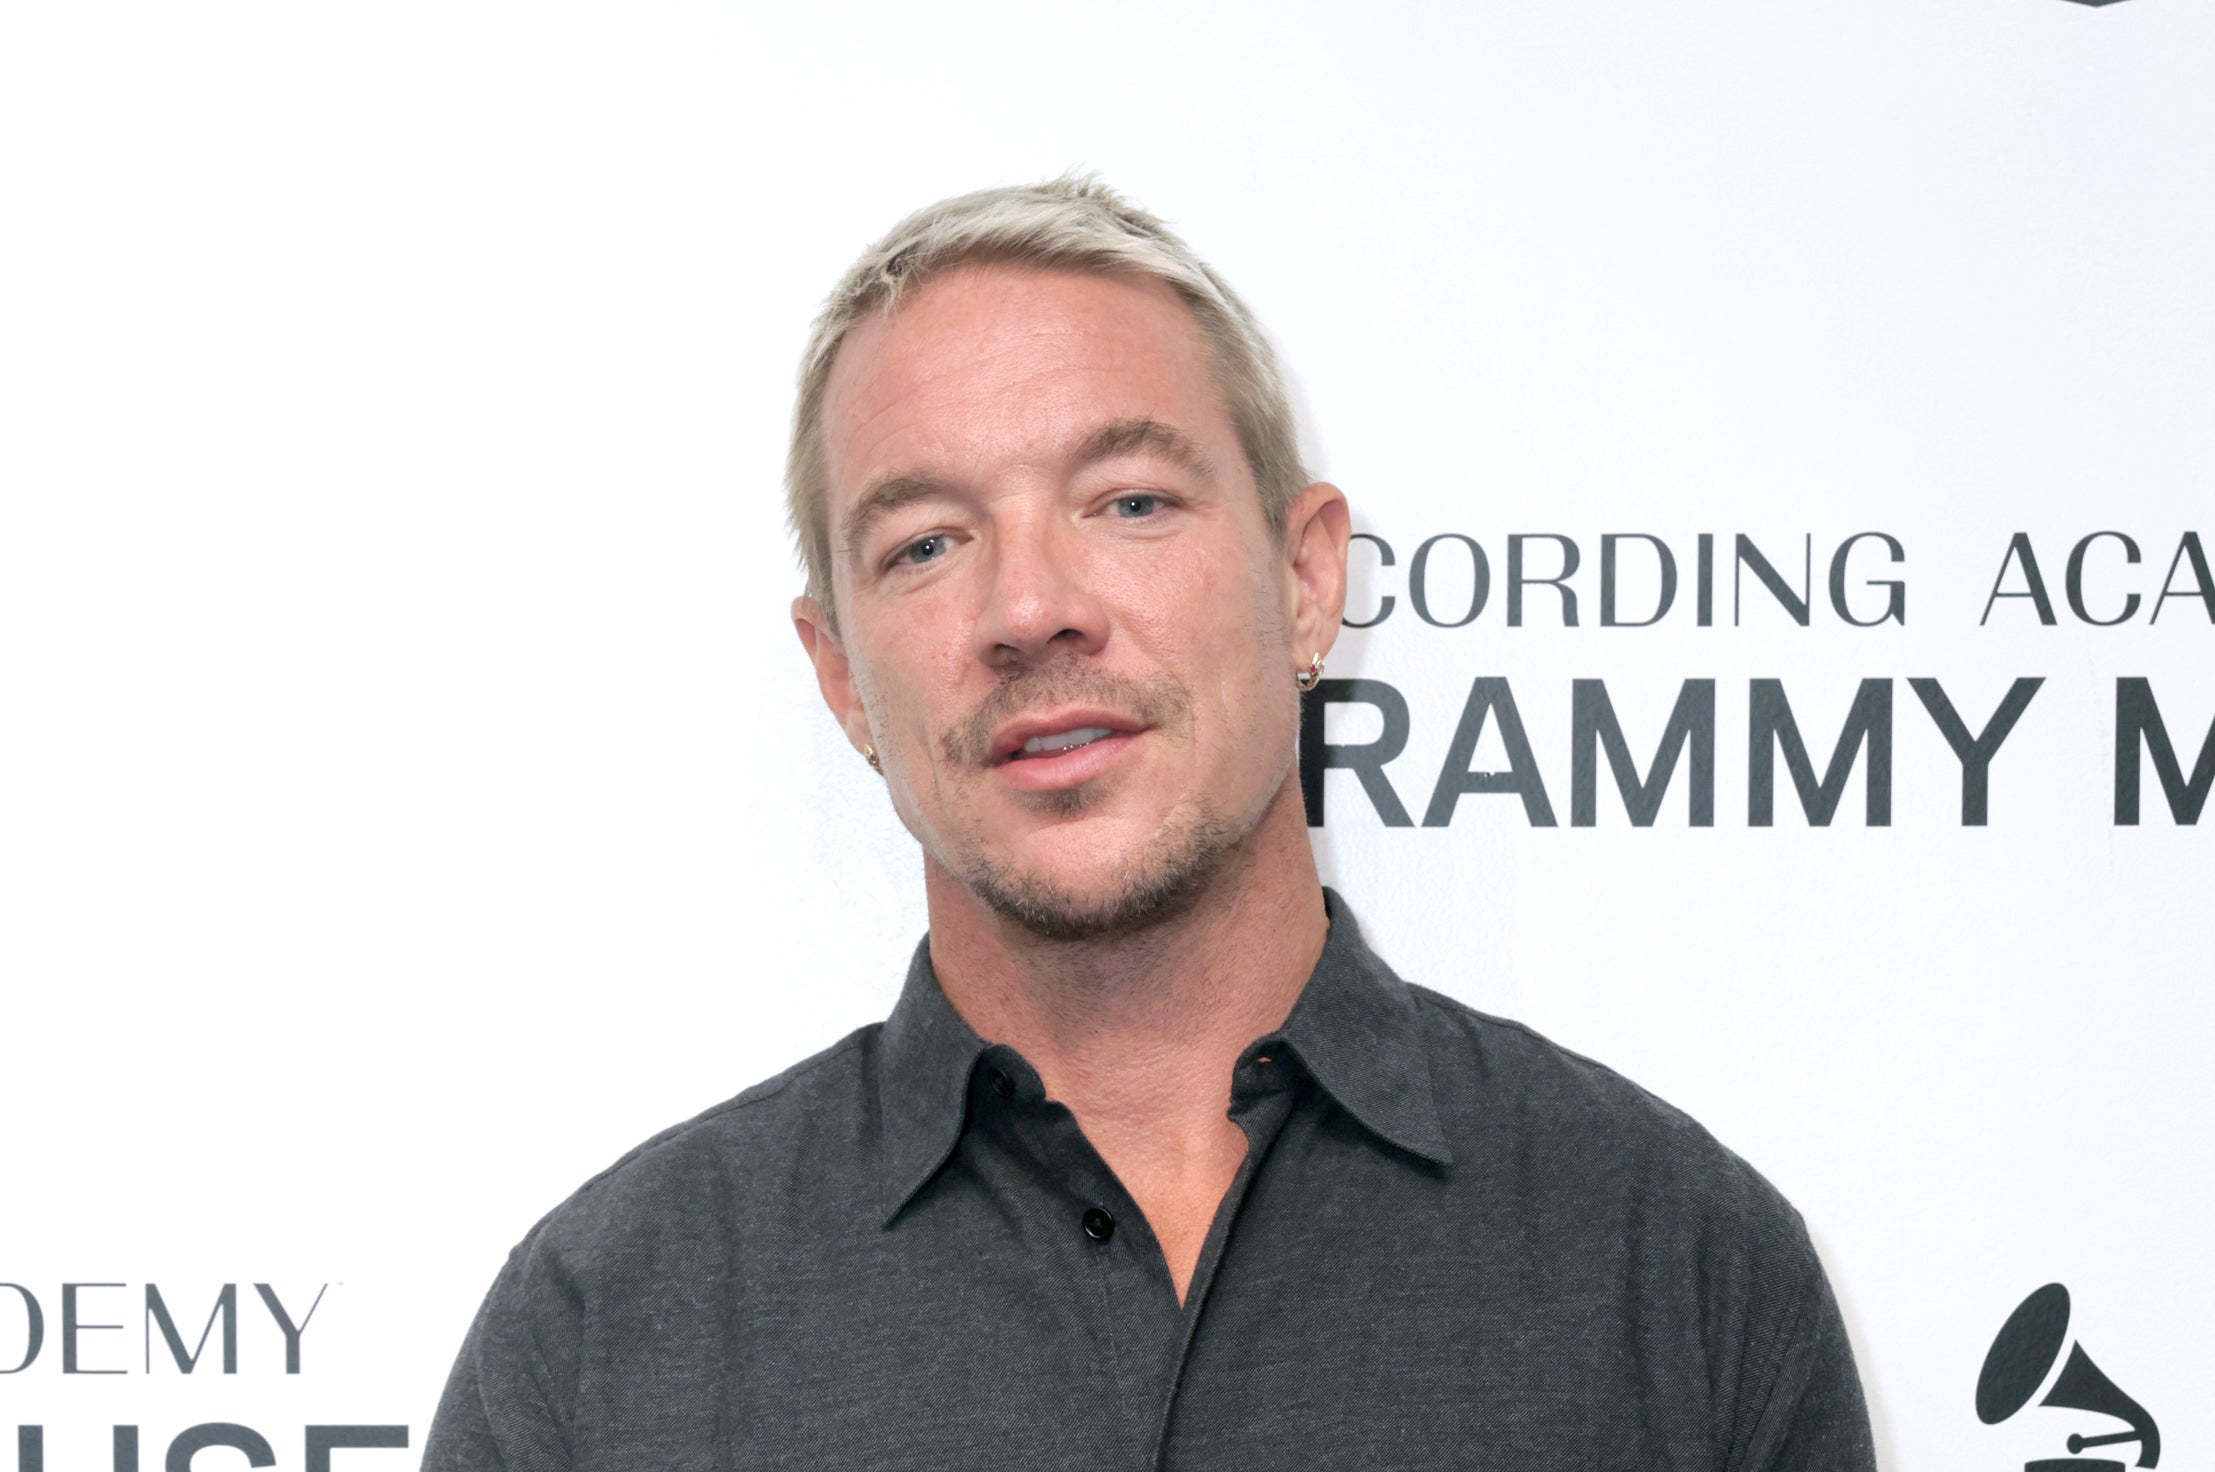 Diplo allegedly distrubited sexual images and videos of Jane Doe without her consent